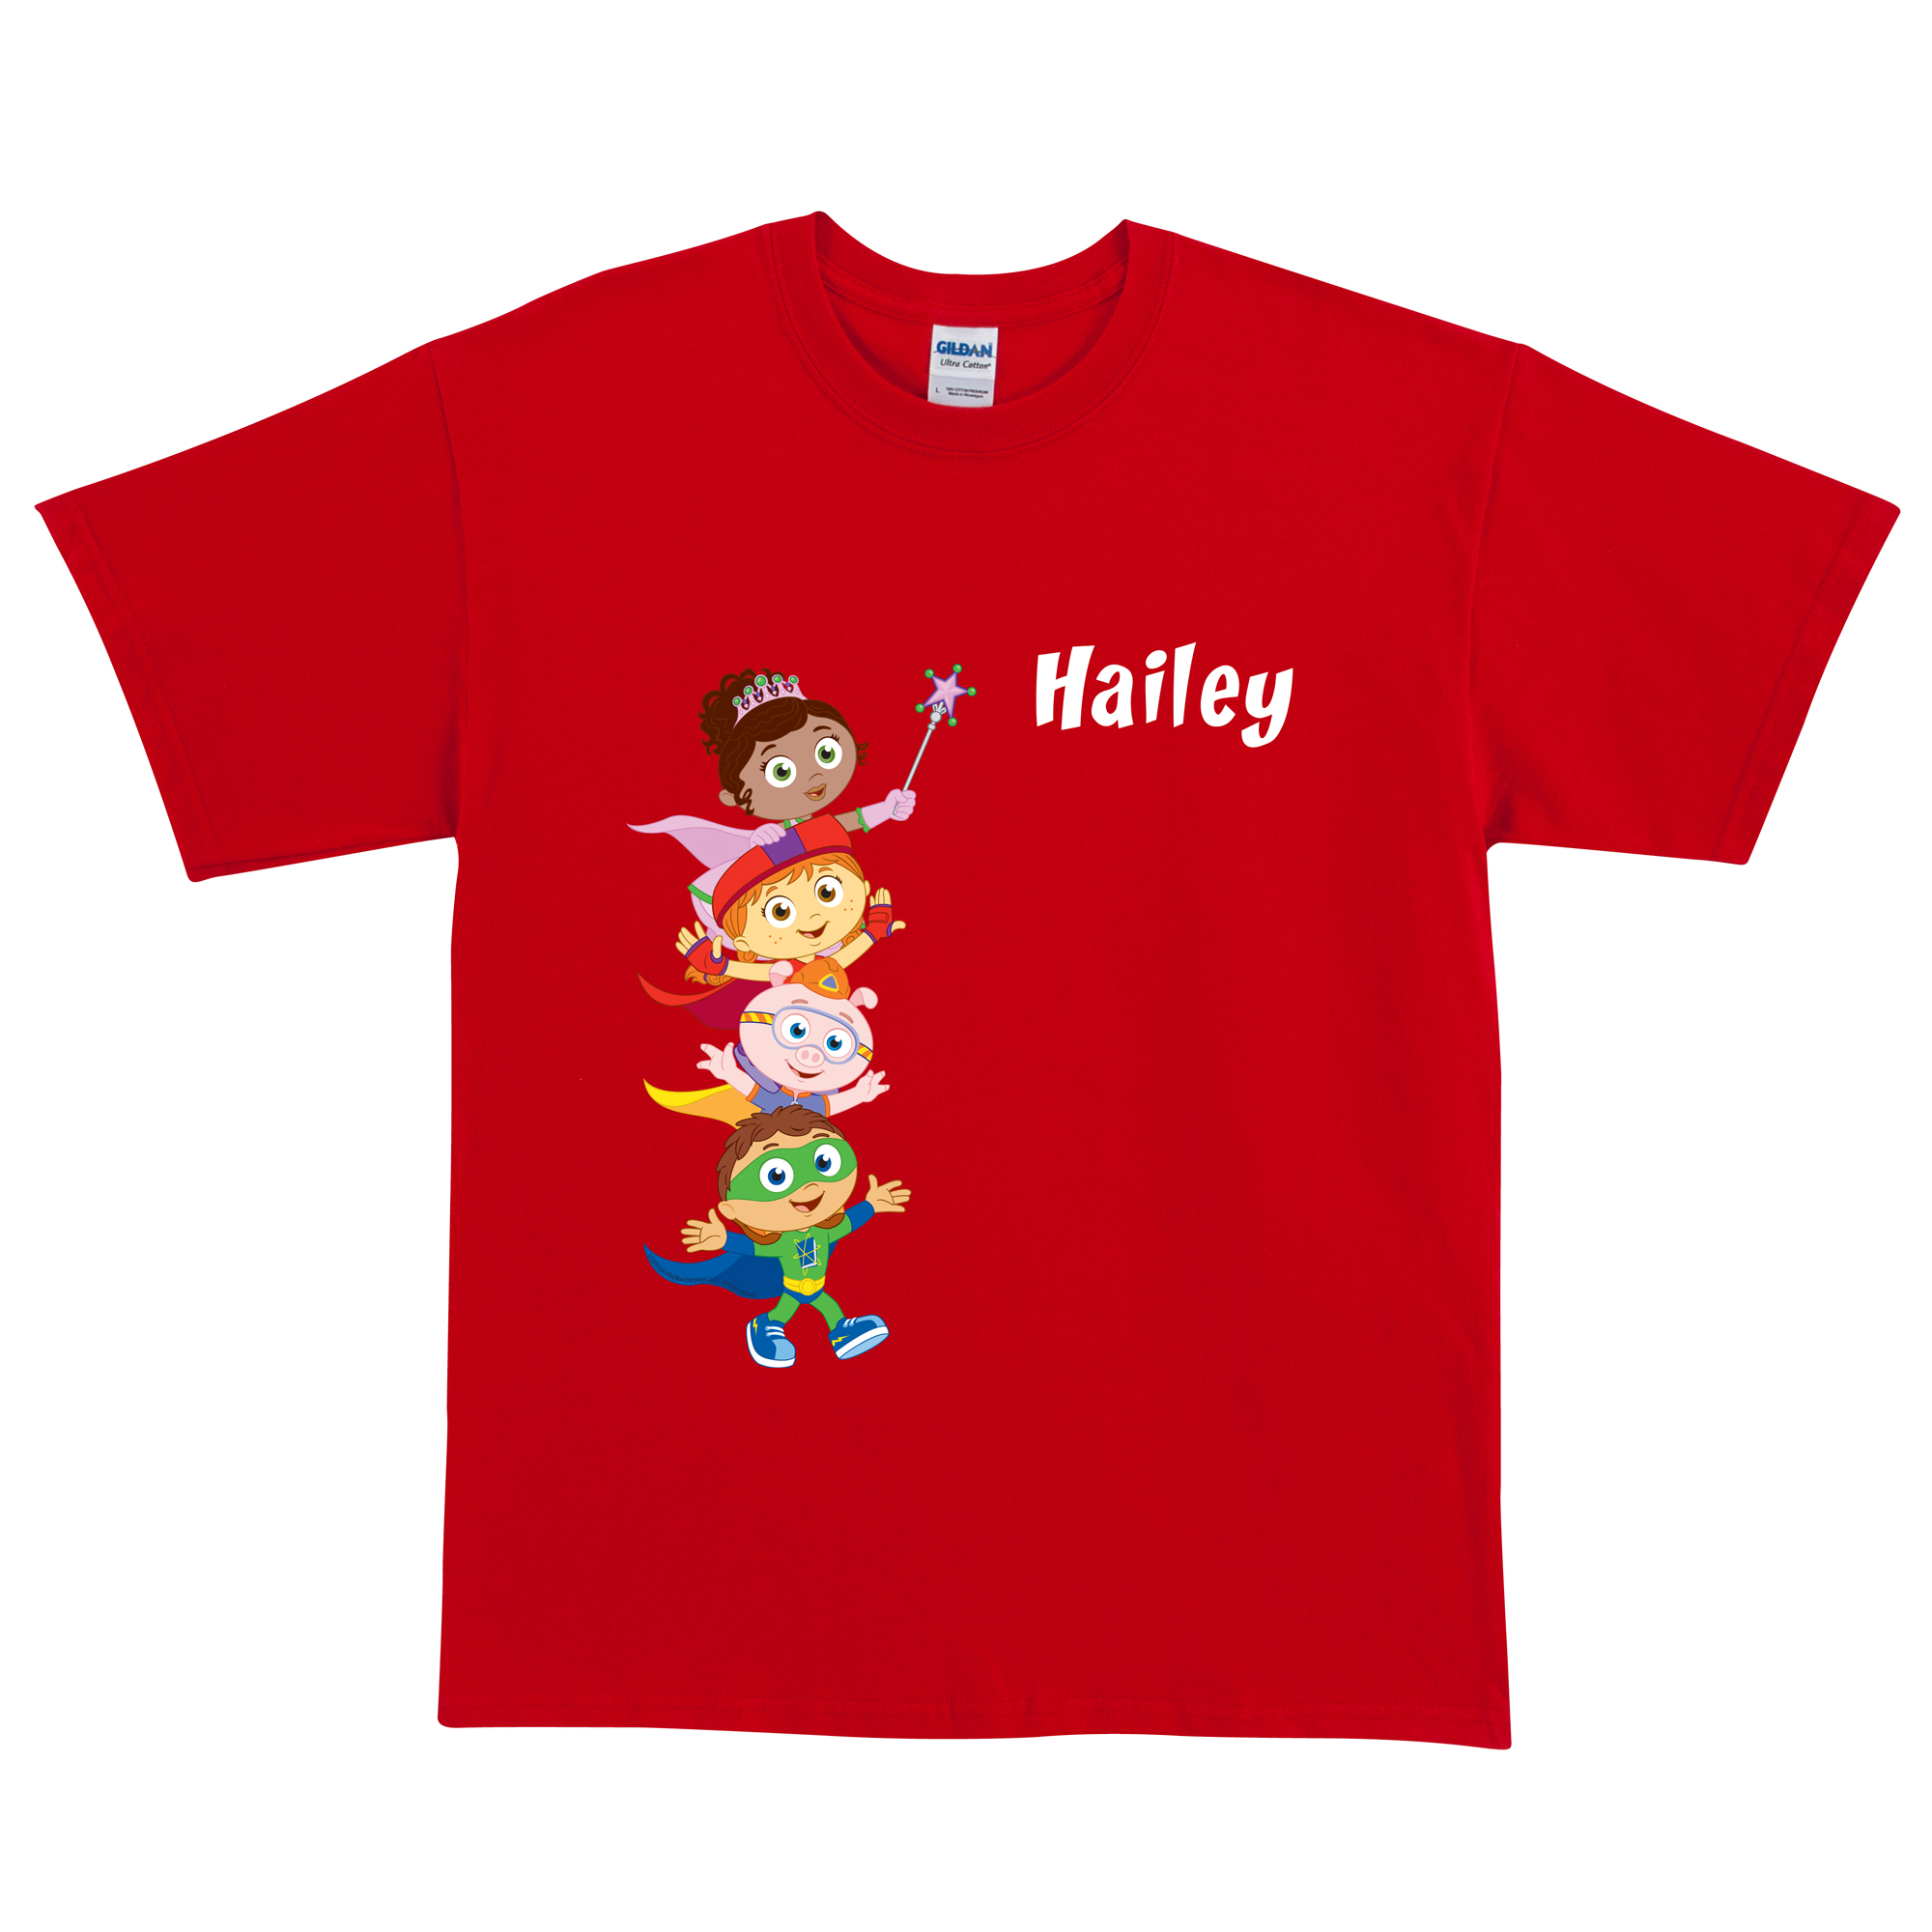 Super Why Hip Hip Hurray! Red Adult T-Shirt